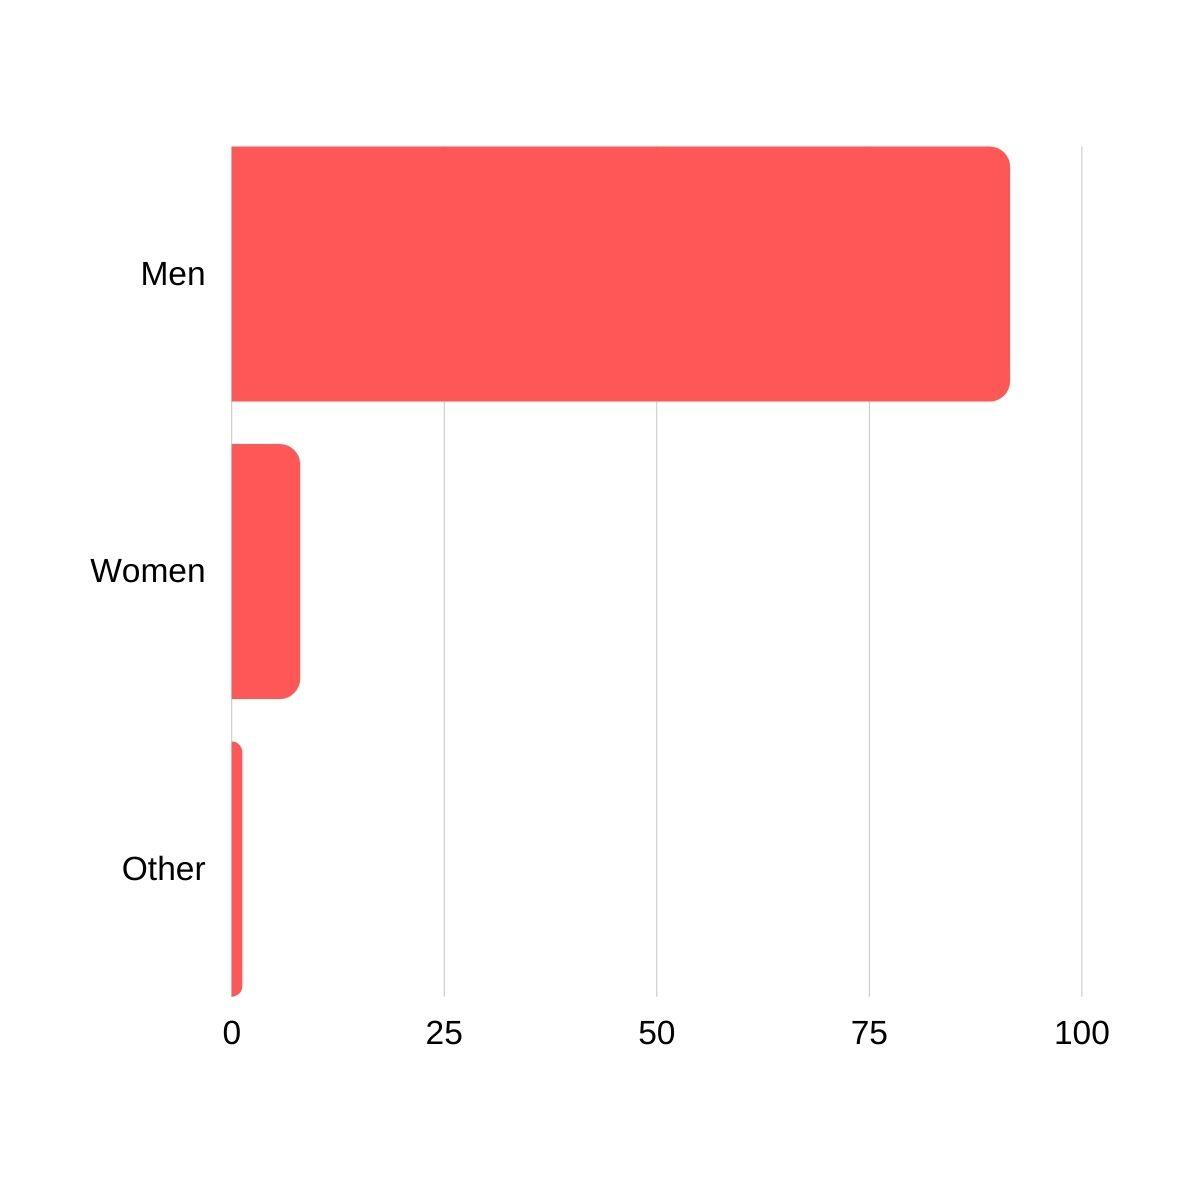 91% of developers identify as male